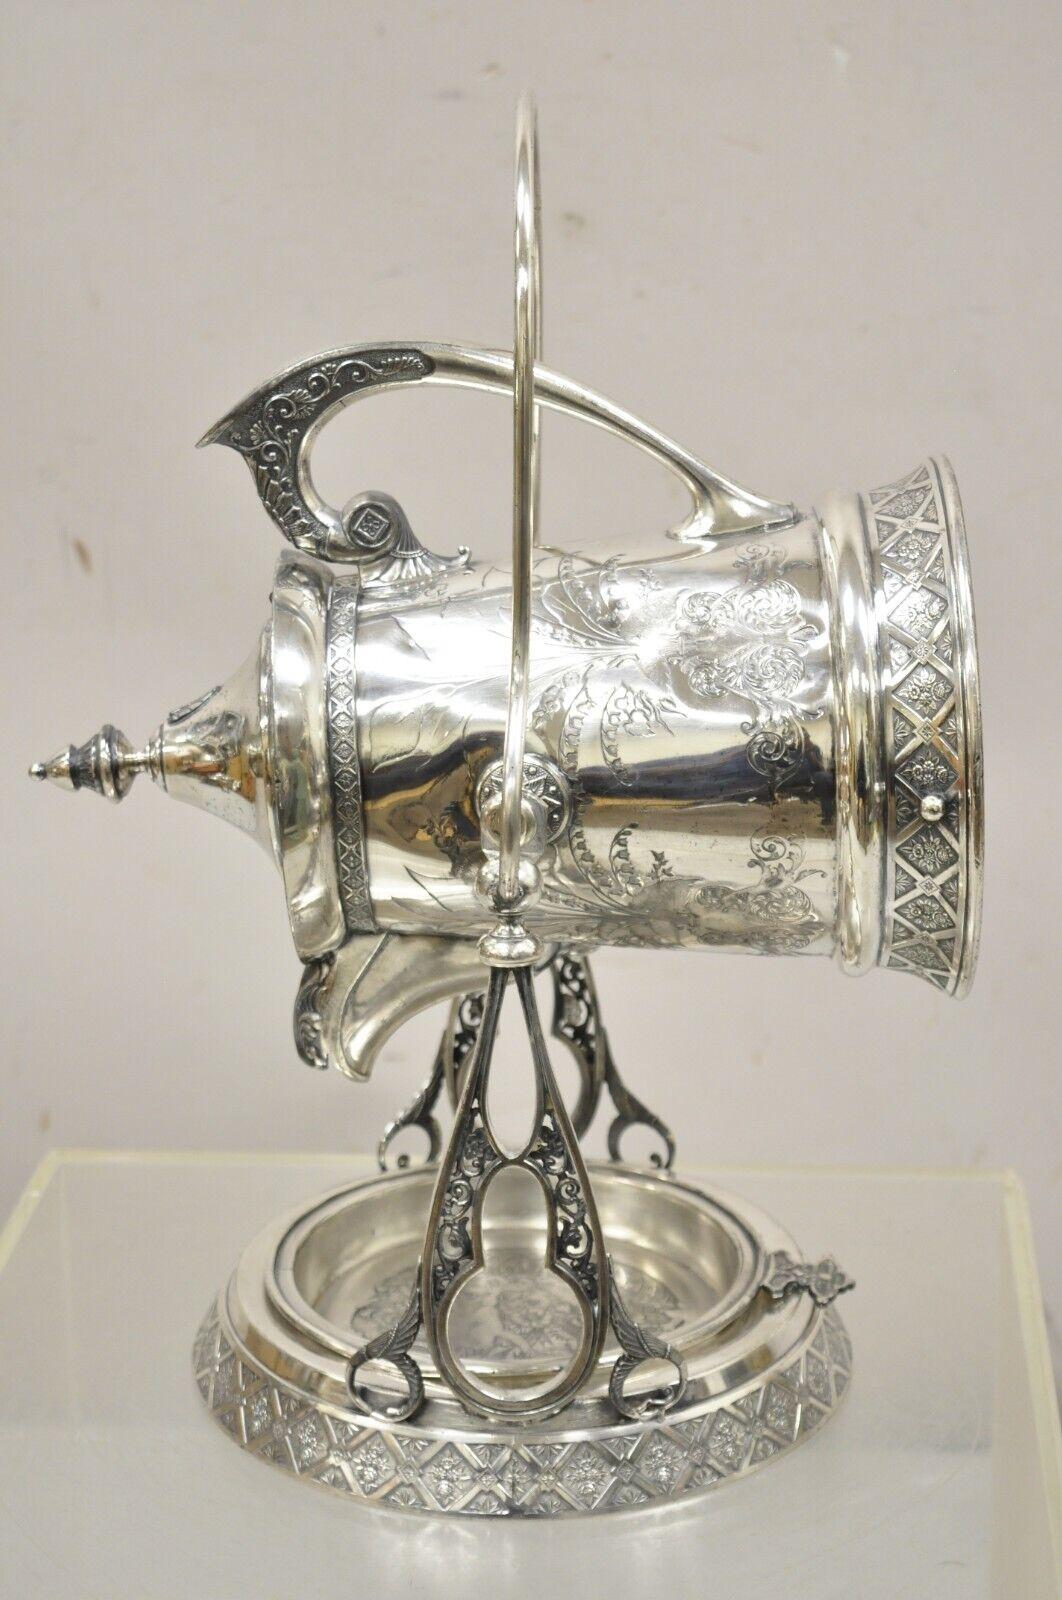 Antique Wilcox Silver Plate Co Victorian Porcelain Lined Tilting Coffee Tea Pot Dispenser. Item features ornate floral etched scrollwork, tilting beverage dispenser, porcelain lined interior, original hallmark, very nice antique item. Circa 1900.